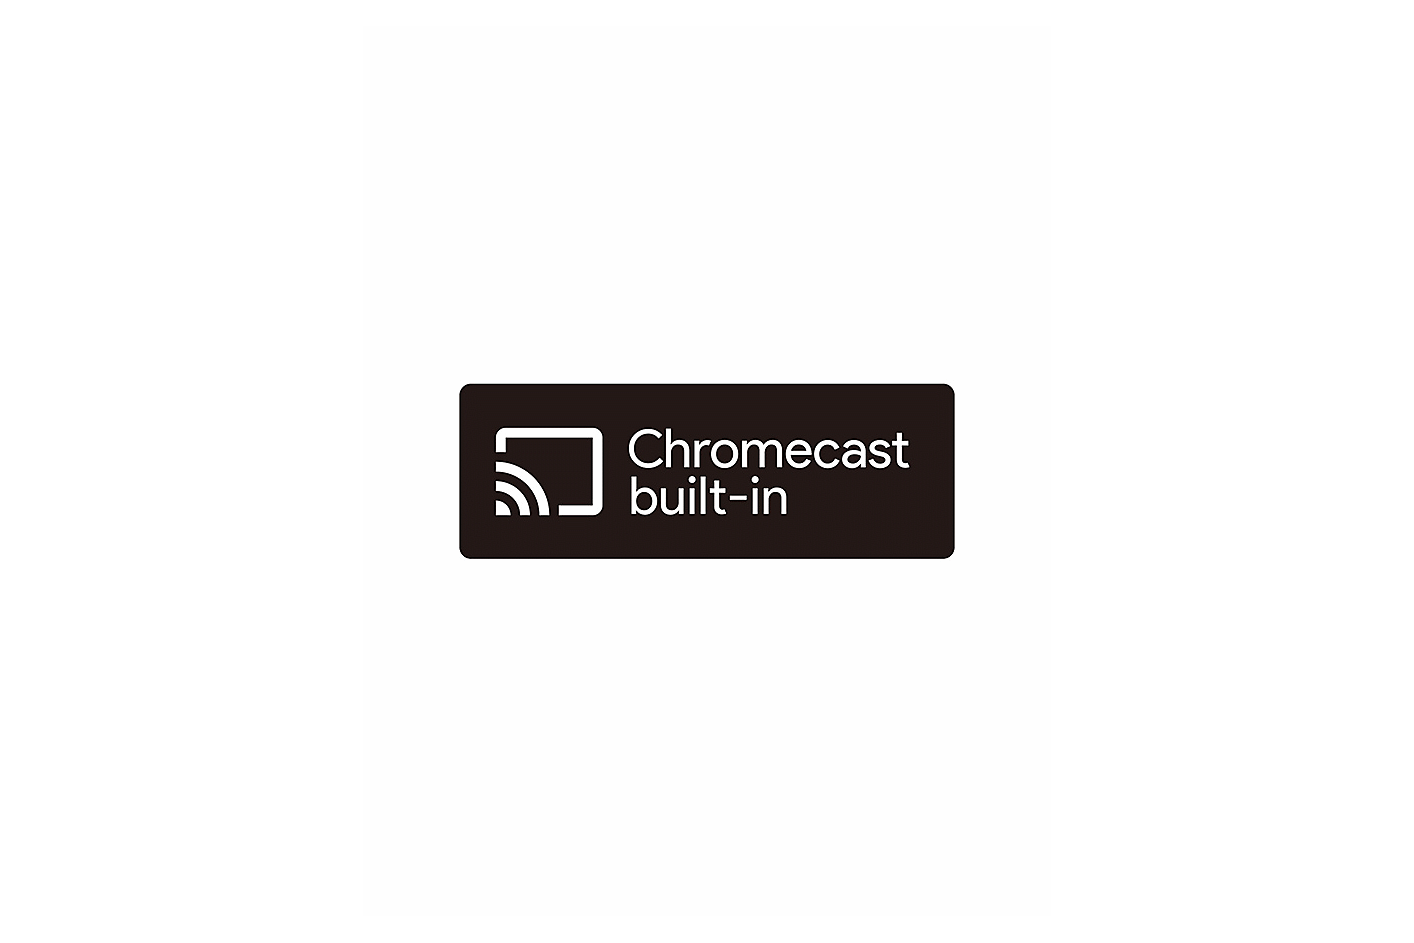 Image of a Chromecast built-in logo on a black background